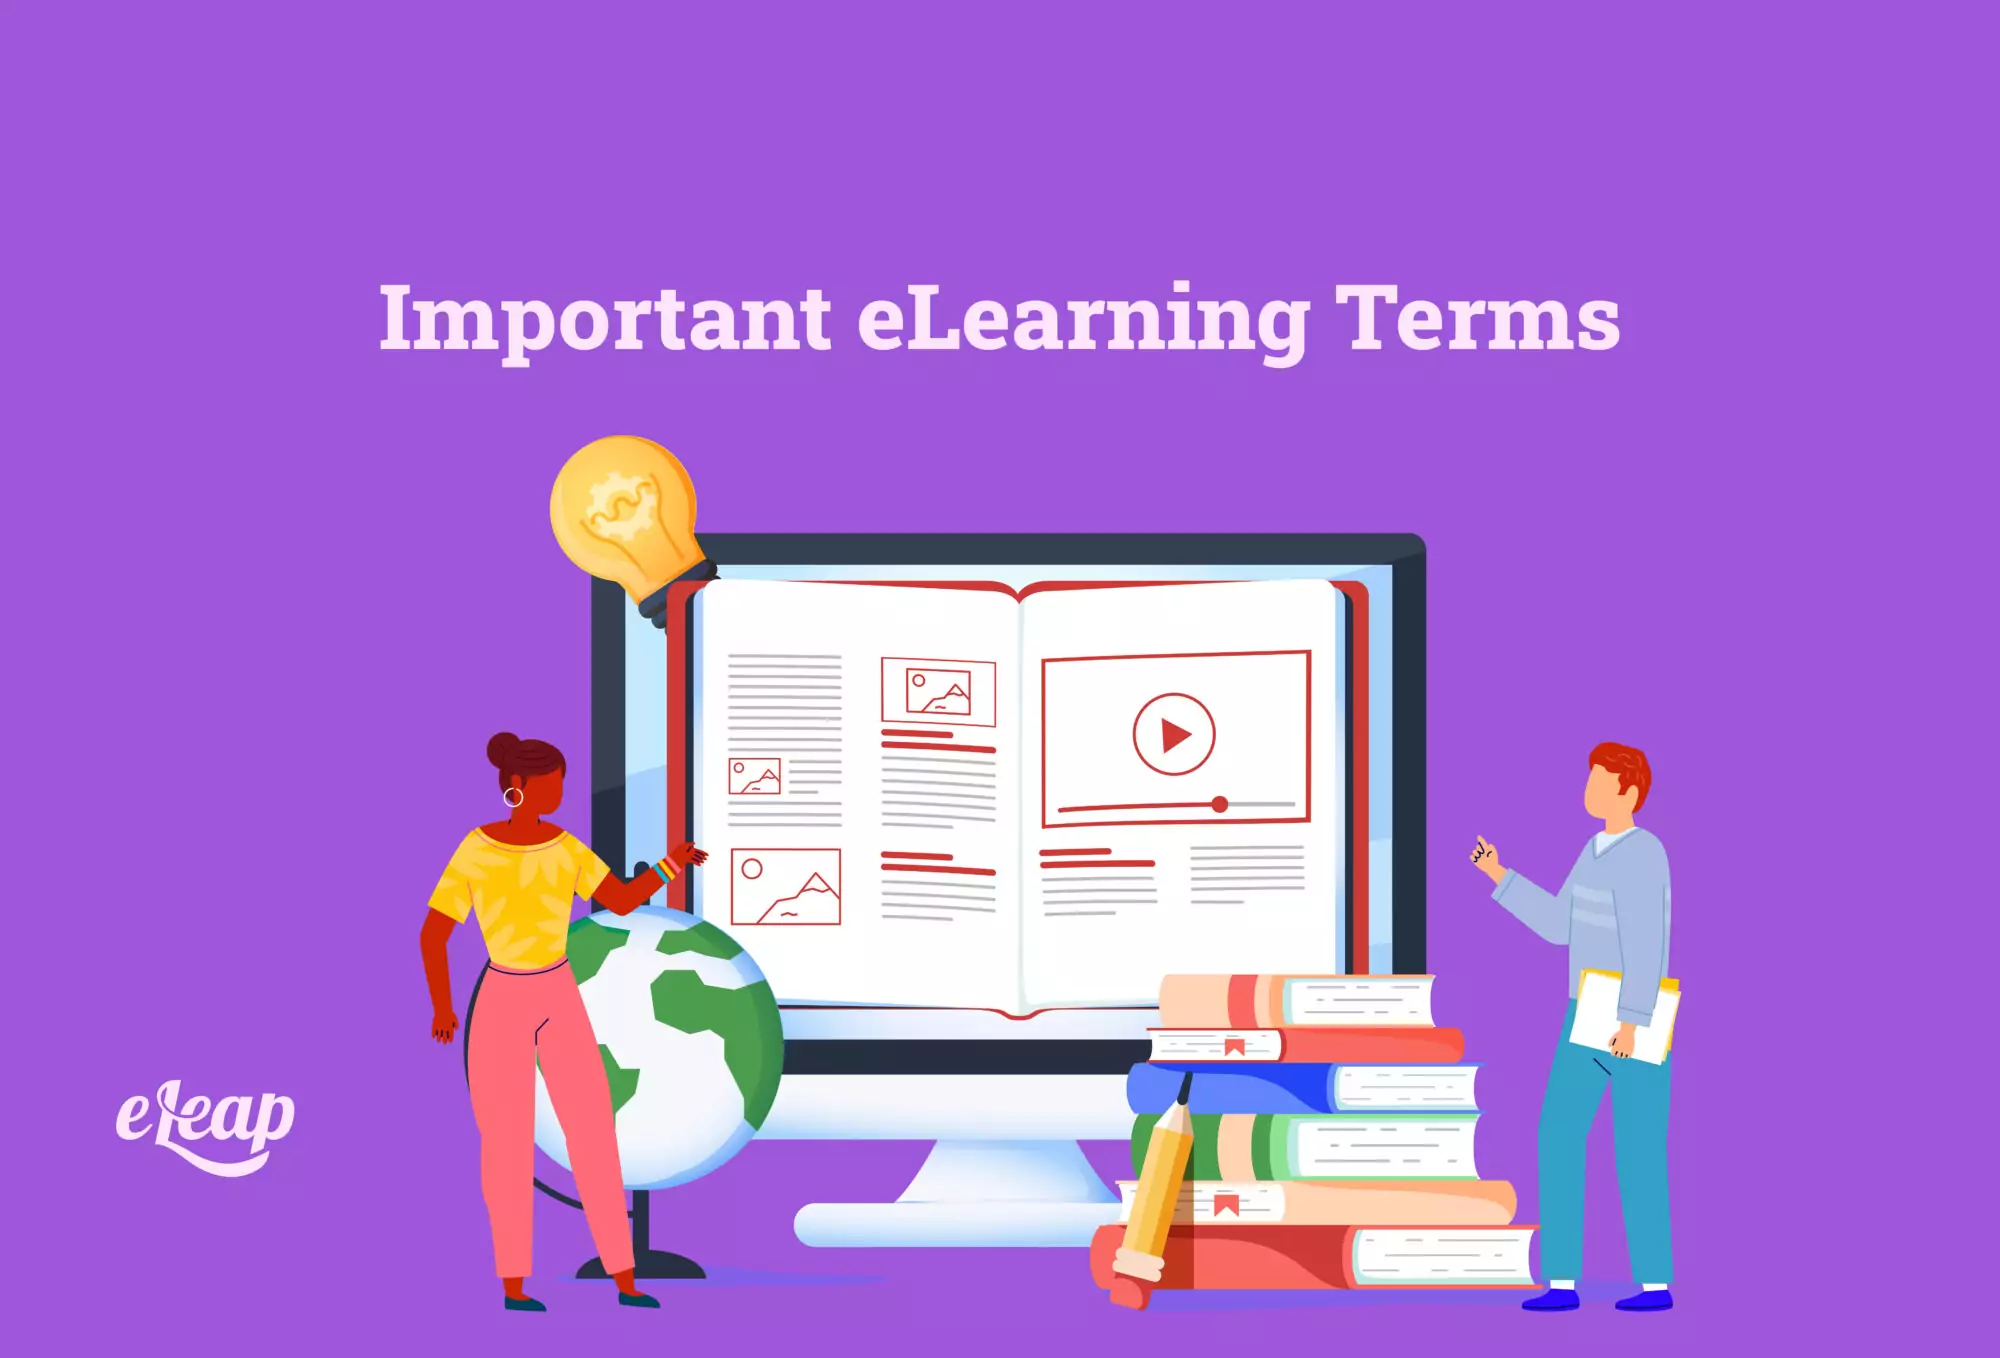 Important eLearning Terms